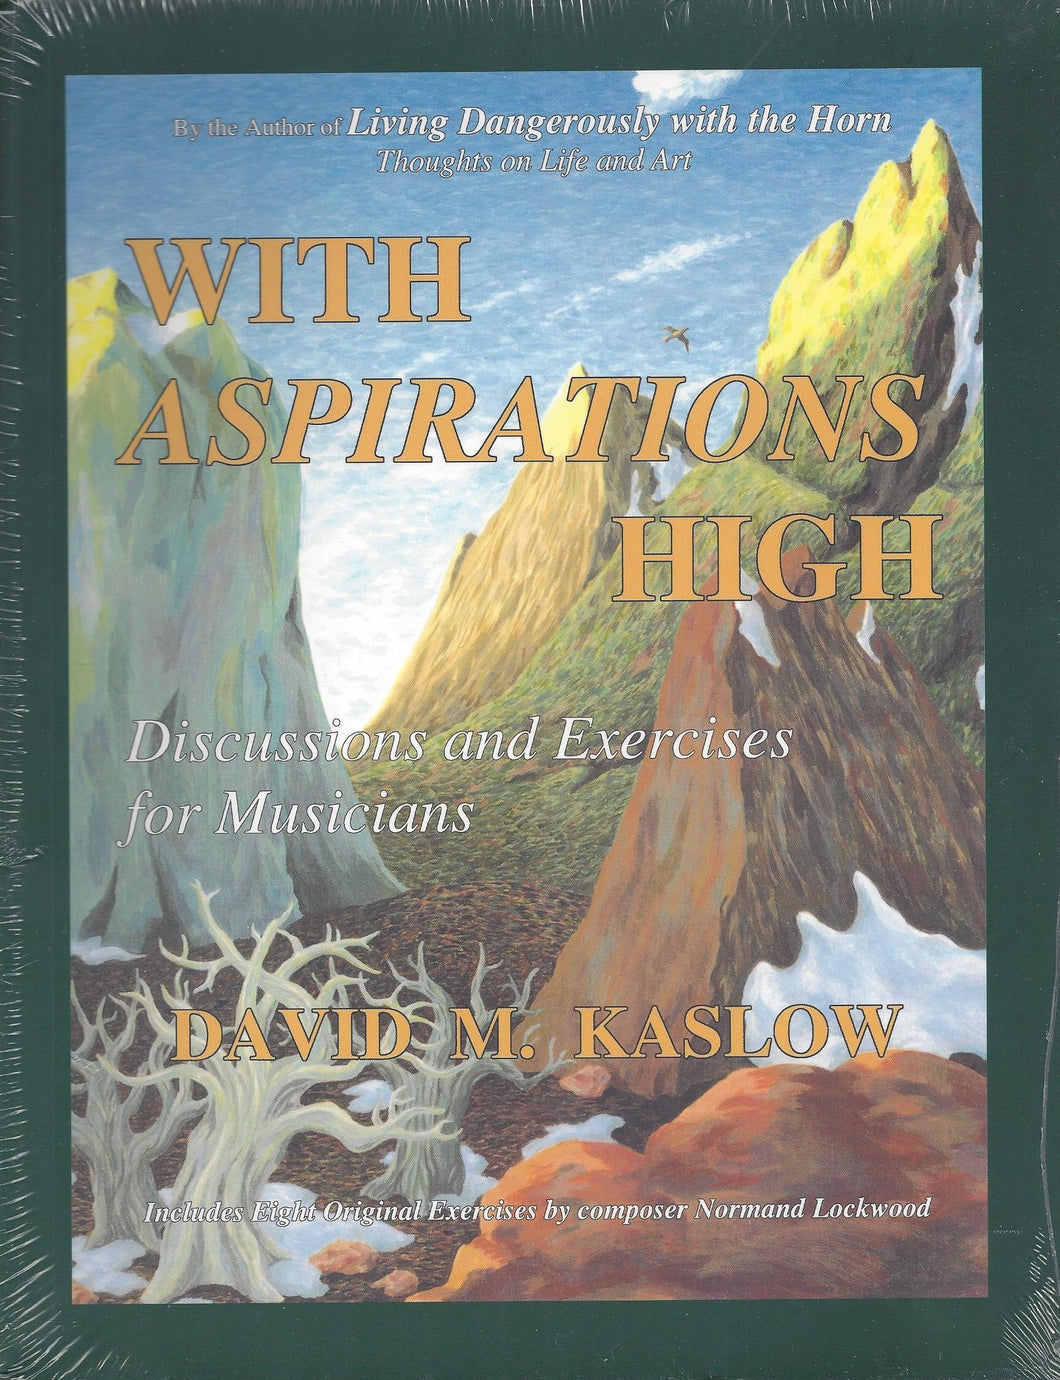 Kaslow, D.M: With Aspirations High - Discussions and Exercises for Musicians